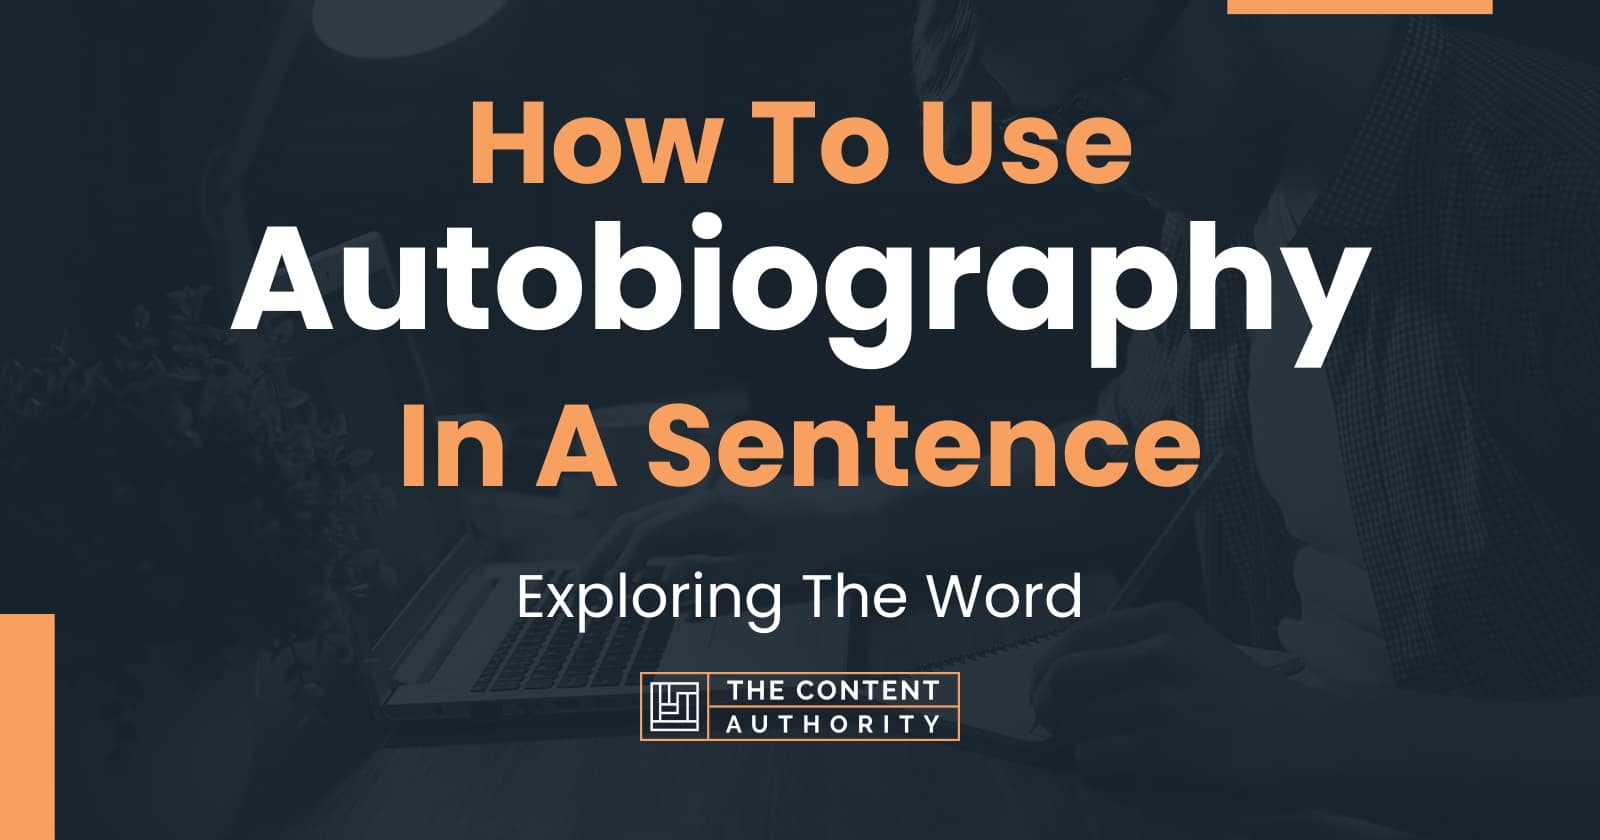 use a sentence with the word autobiography